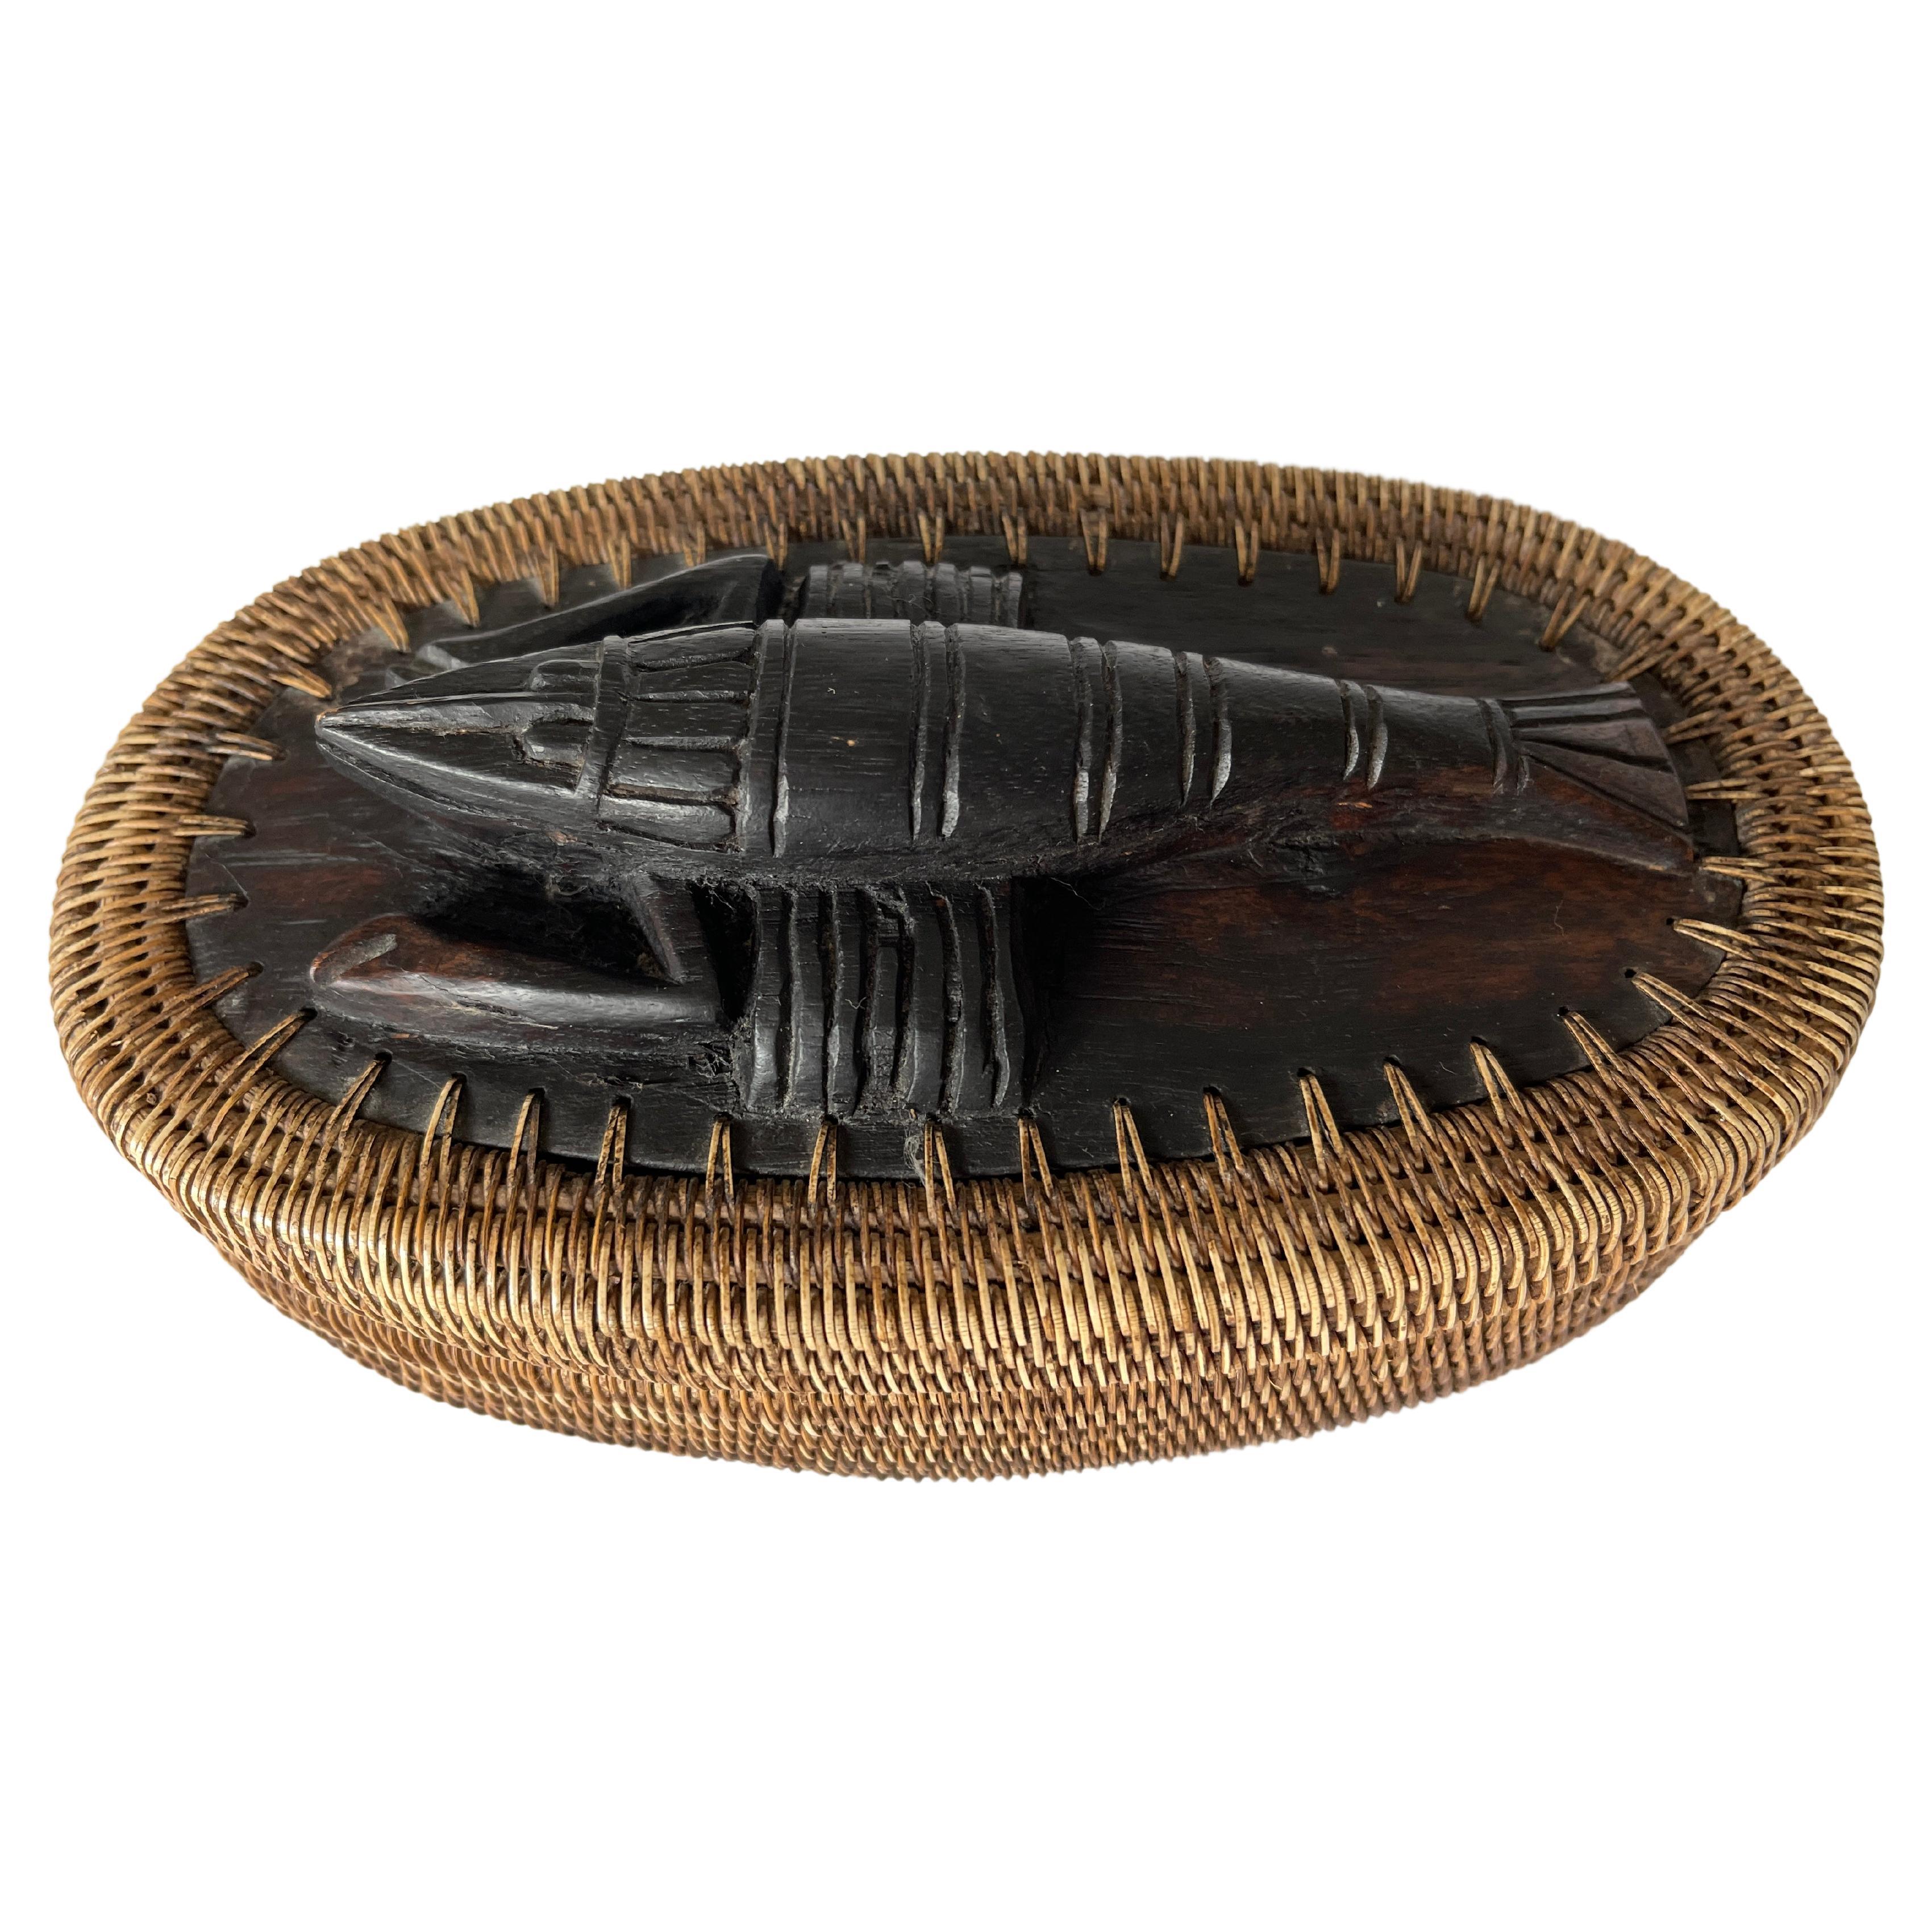 Hand Woven Oval Reed Basket with Carved Wooden Crawfish Lid